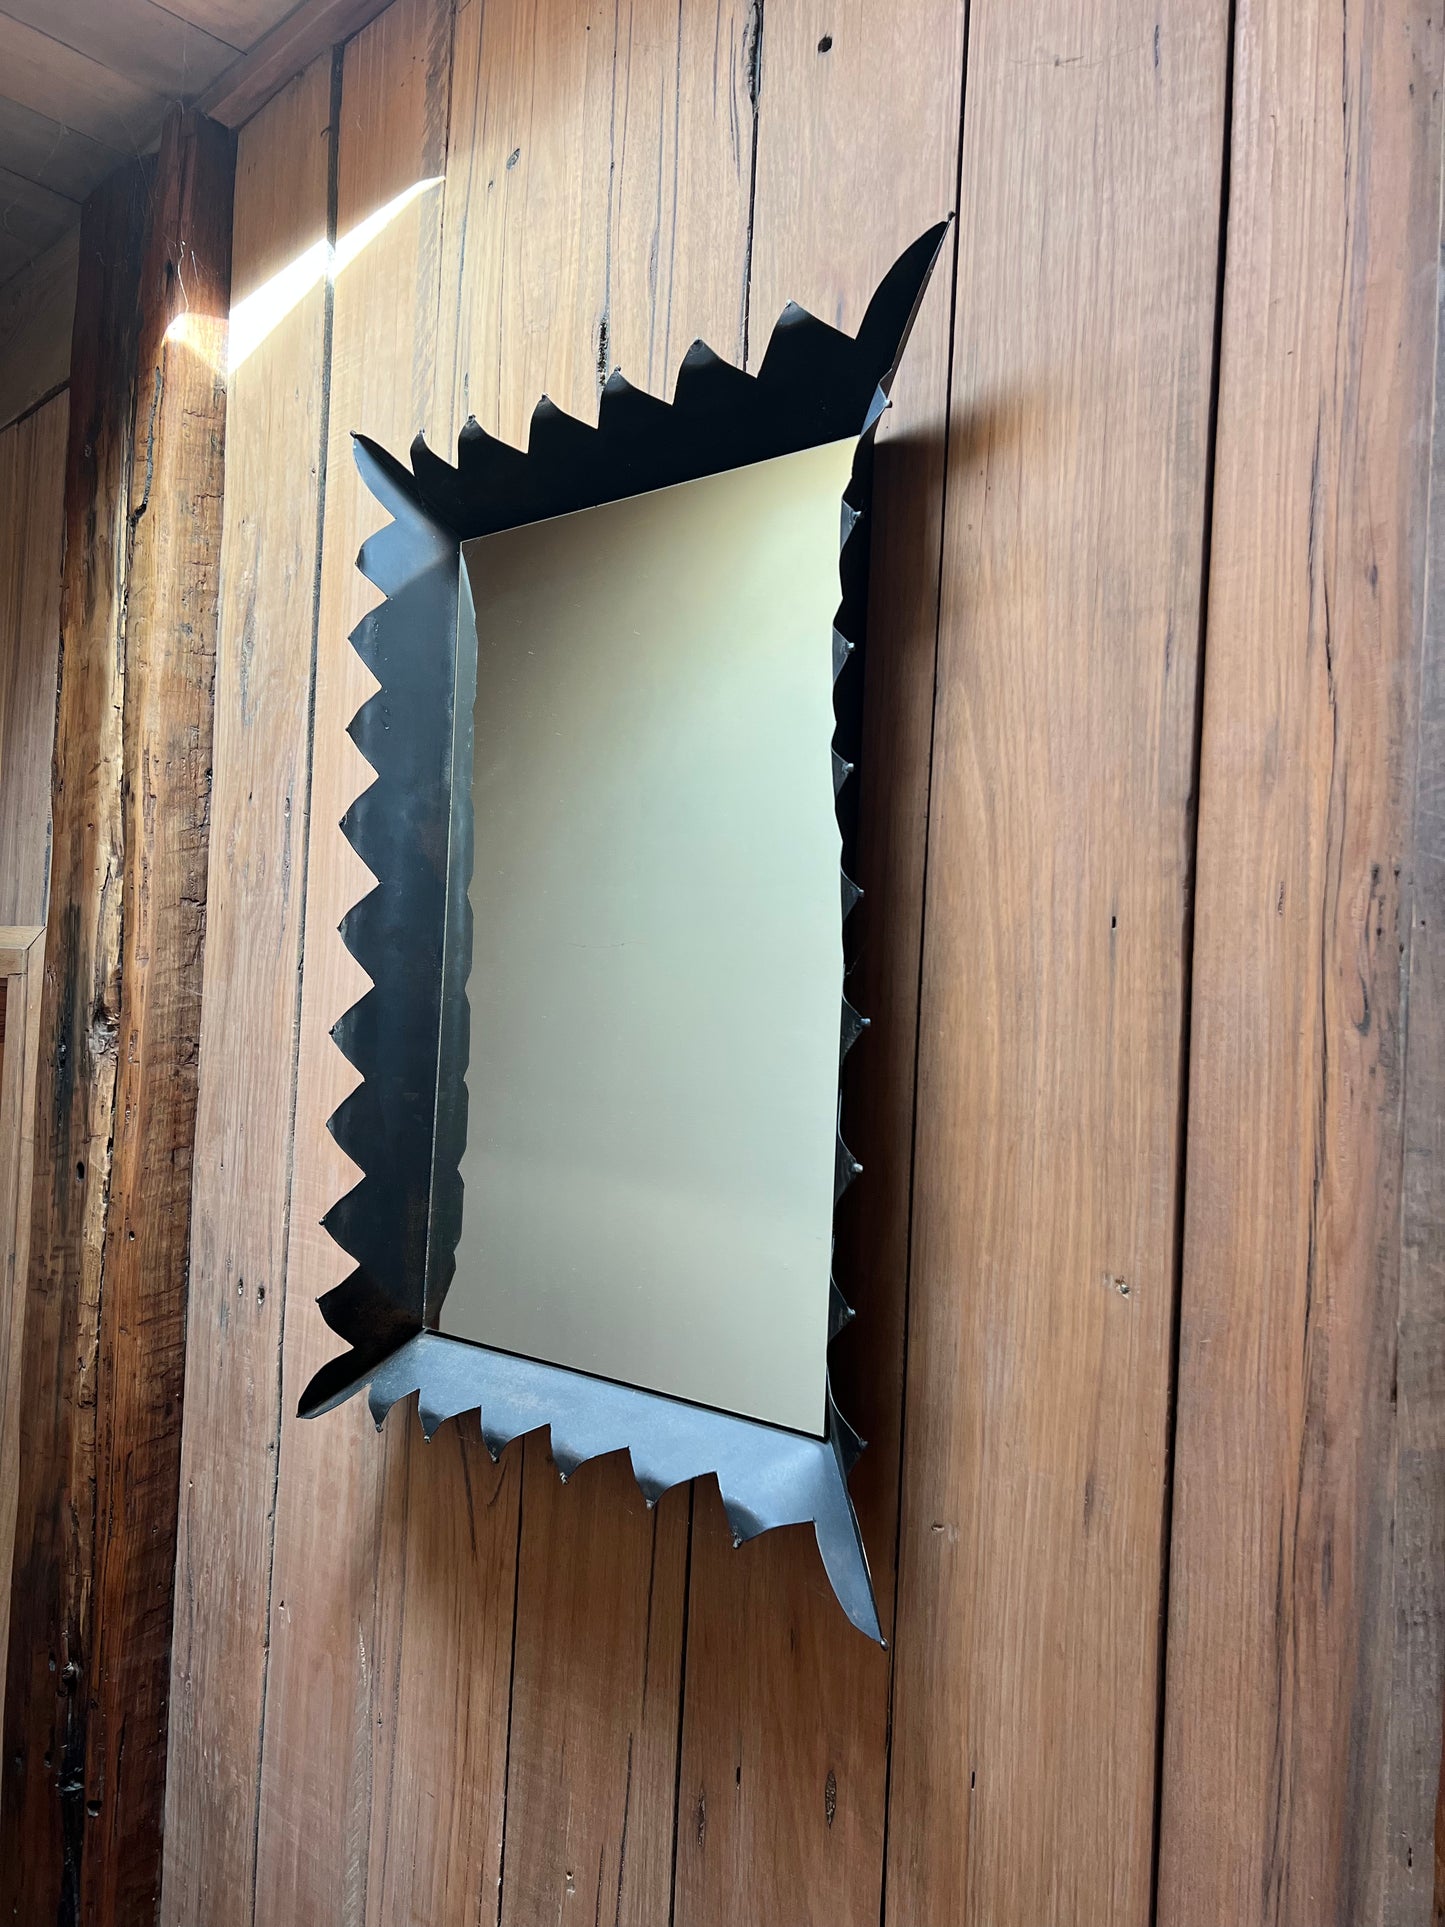 Large Hand-Crafted Piazza Mirror